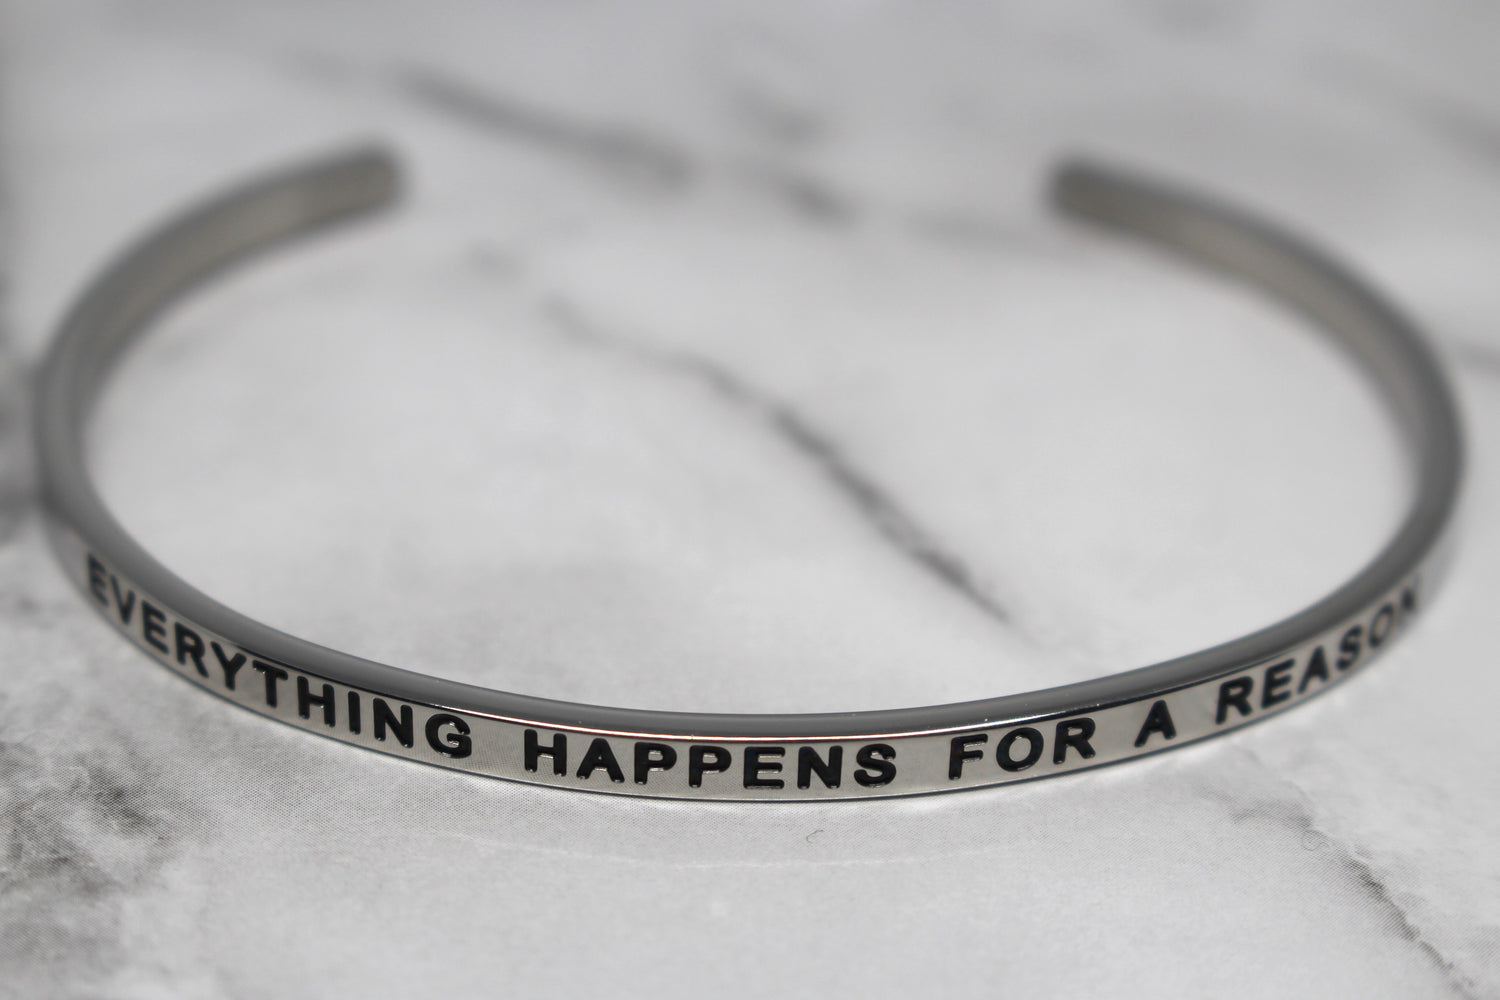 EVERYTHING HAPPENS FOR A REASON* Cuff Bracelet- Silver